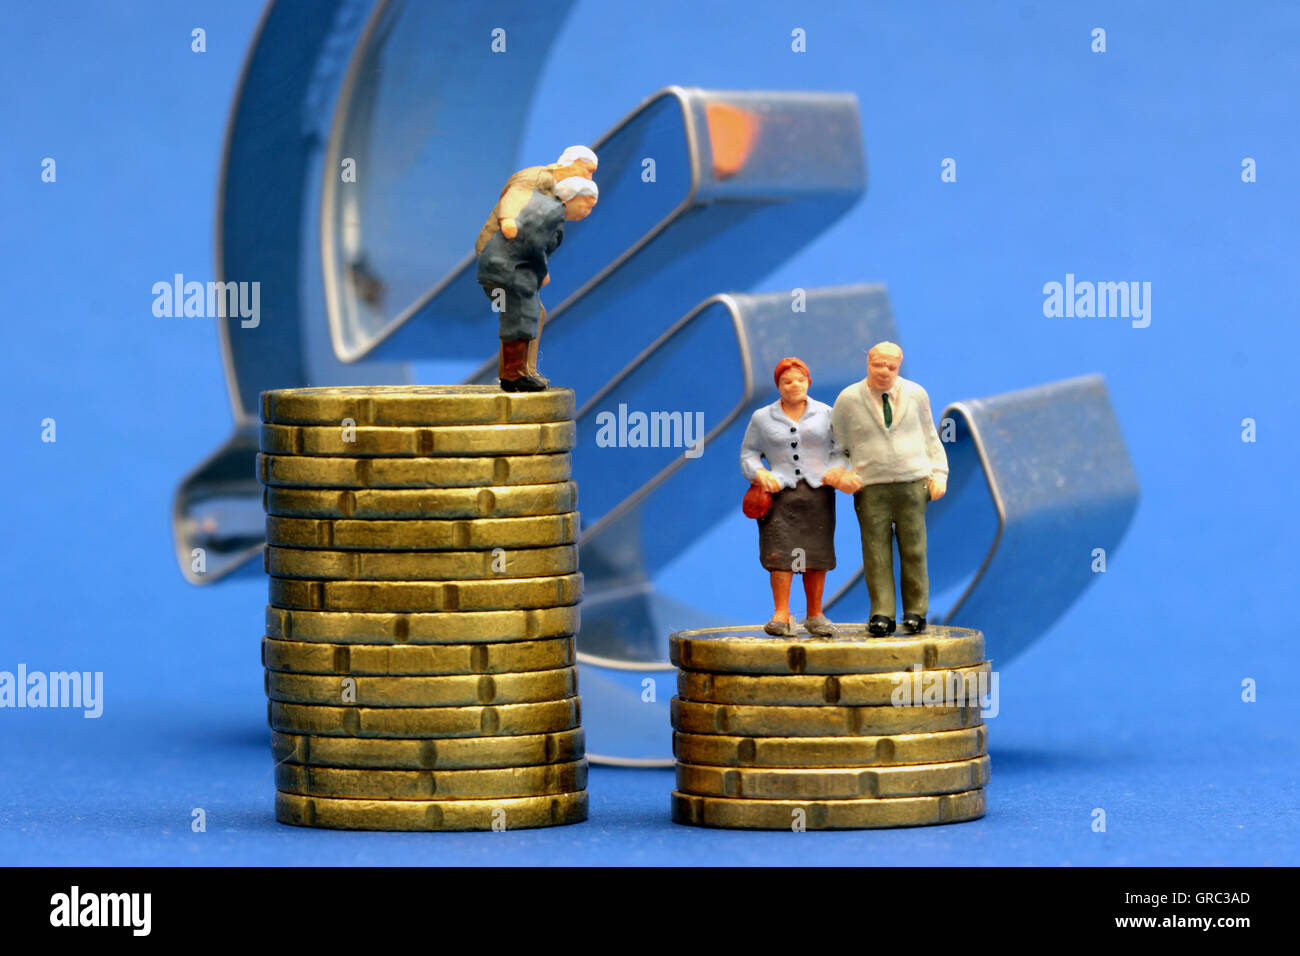 Senior Citizen Standing On Coins With Euro Sign Stock Photo